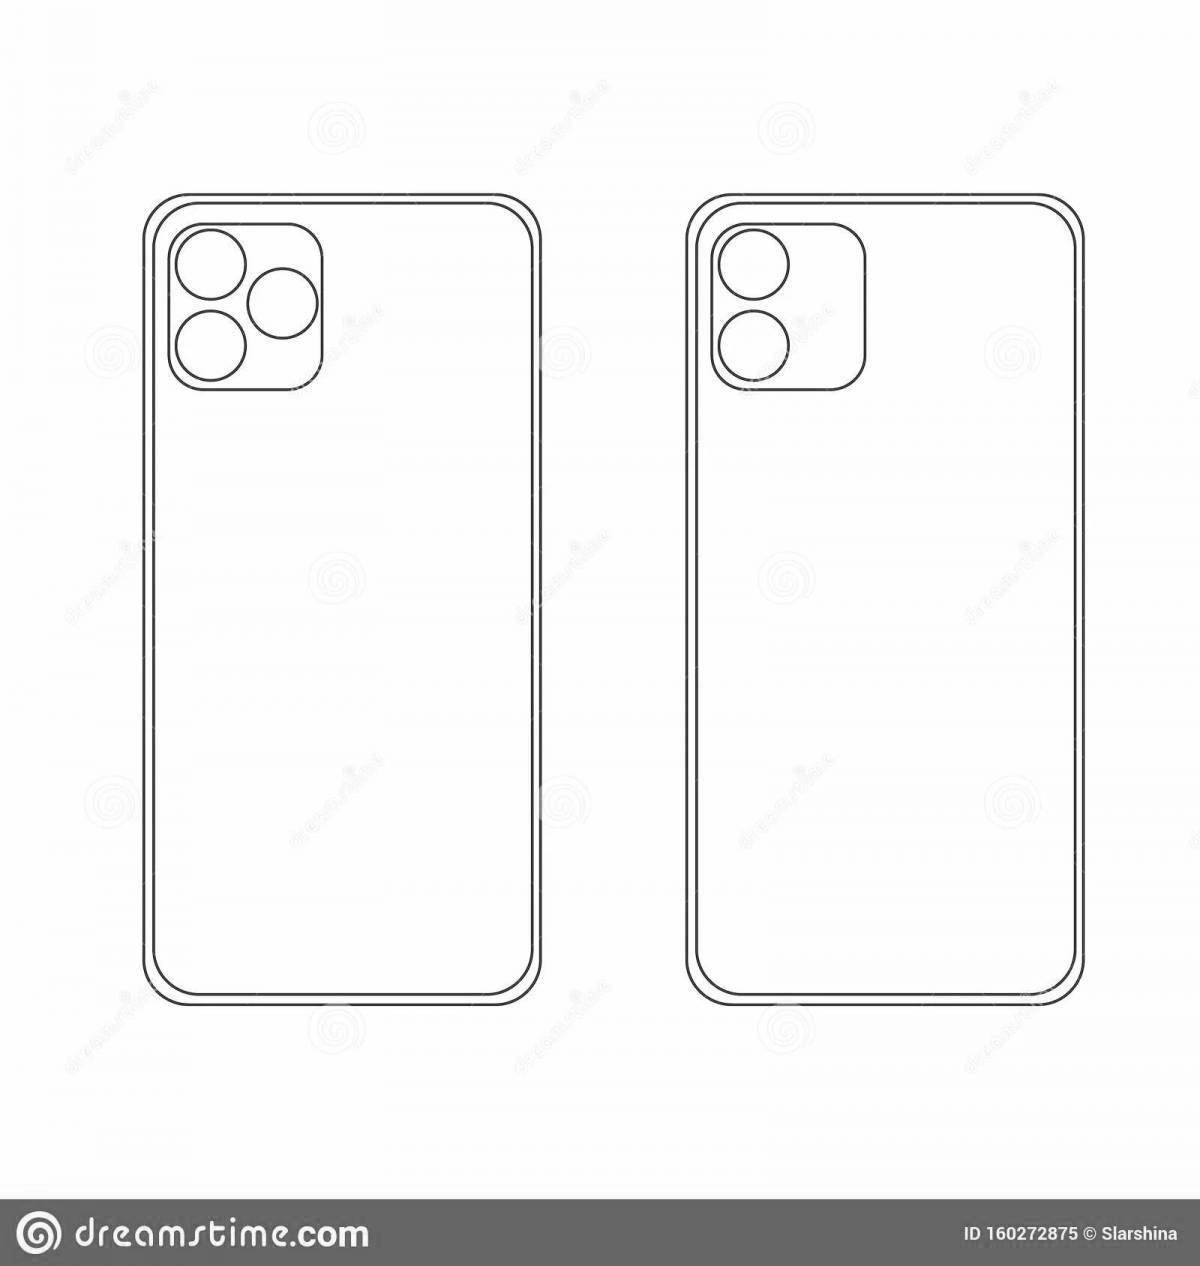 Playful iphone 11 coloring page